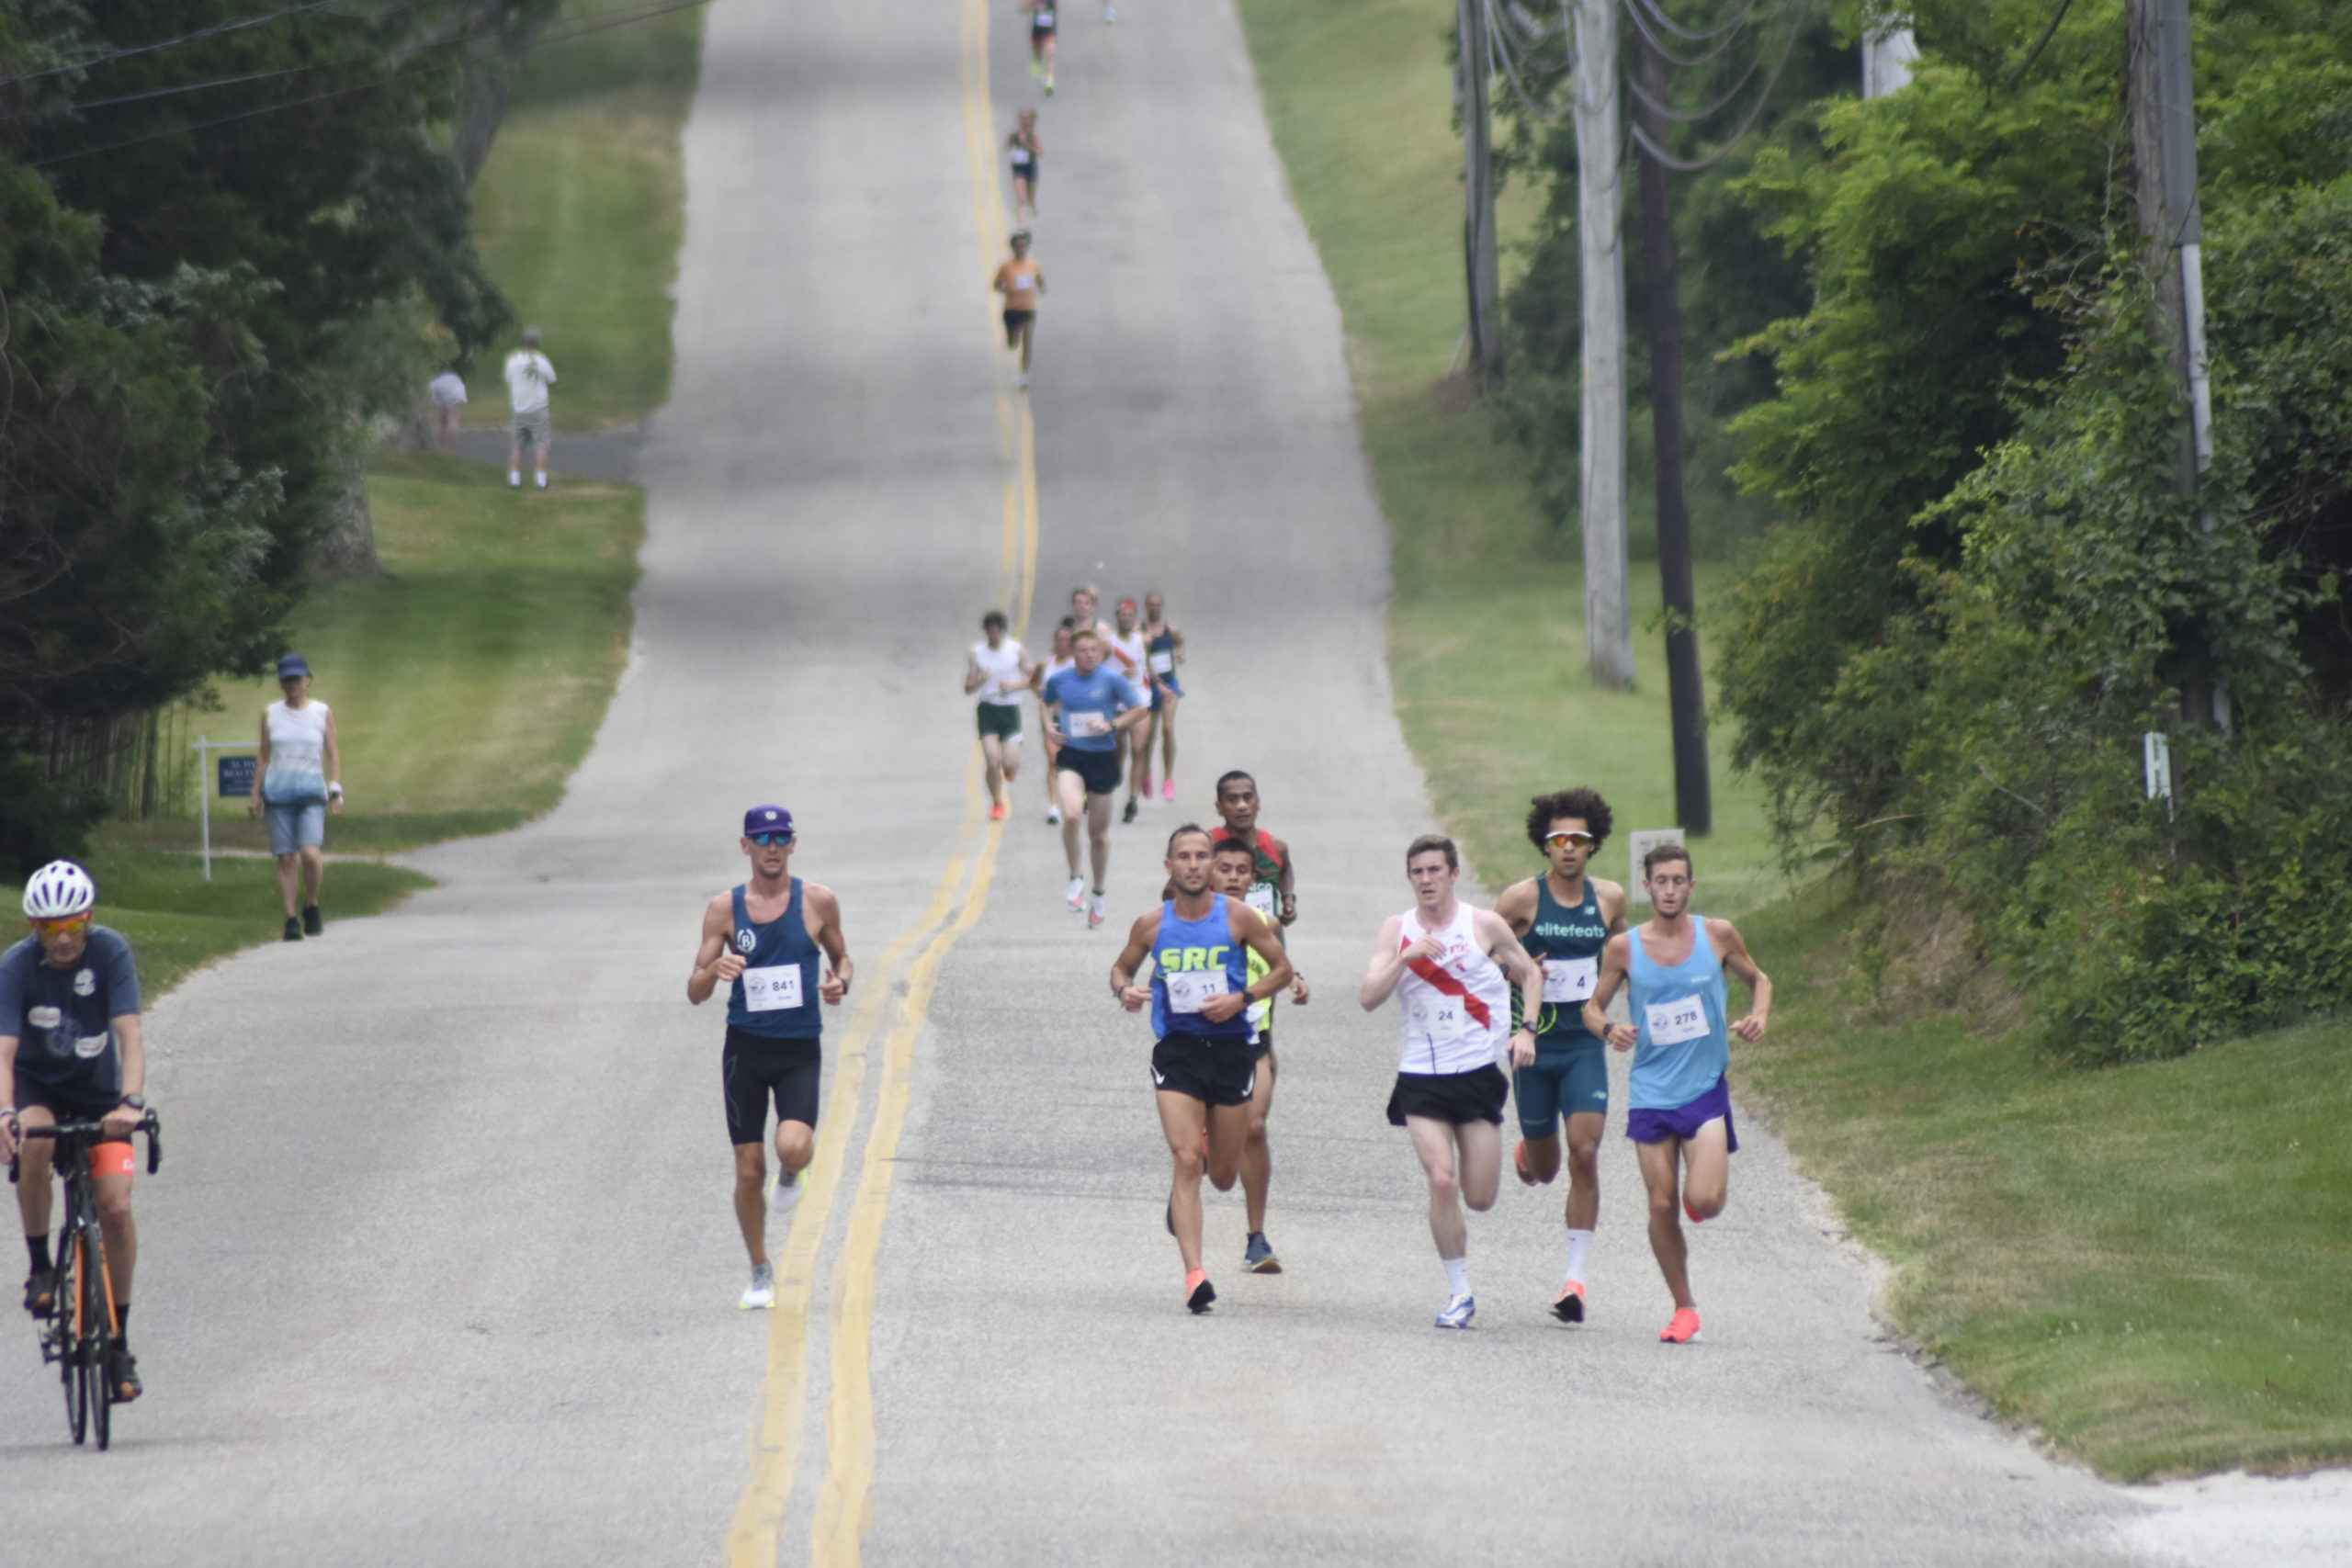 After having just a virtual race last year due to the pandemic, the 42nd annual Shelter Island 10K was done both live and virtually, with around 1,000 runners making the trip to compete on Saturday.